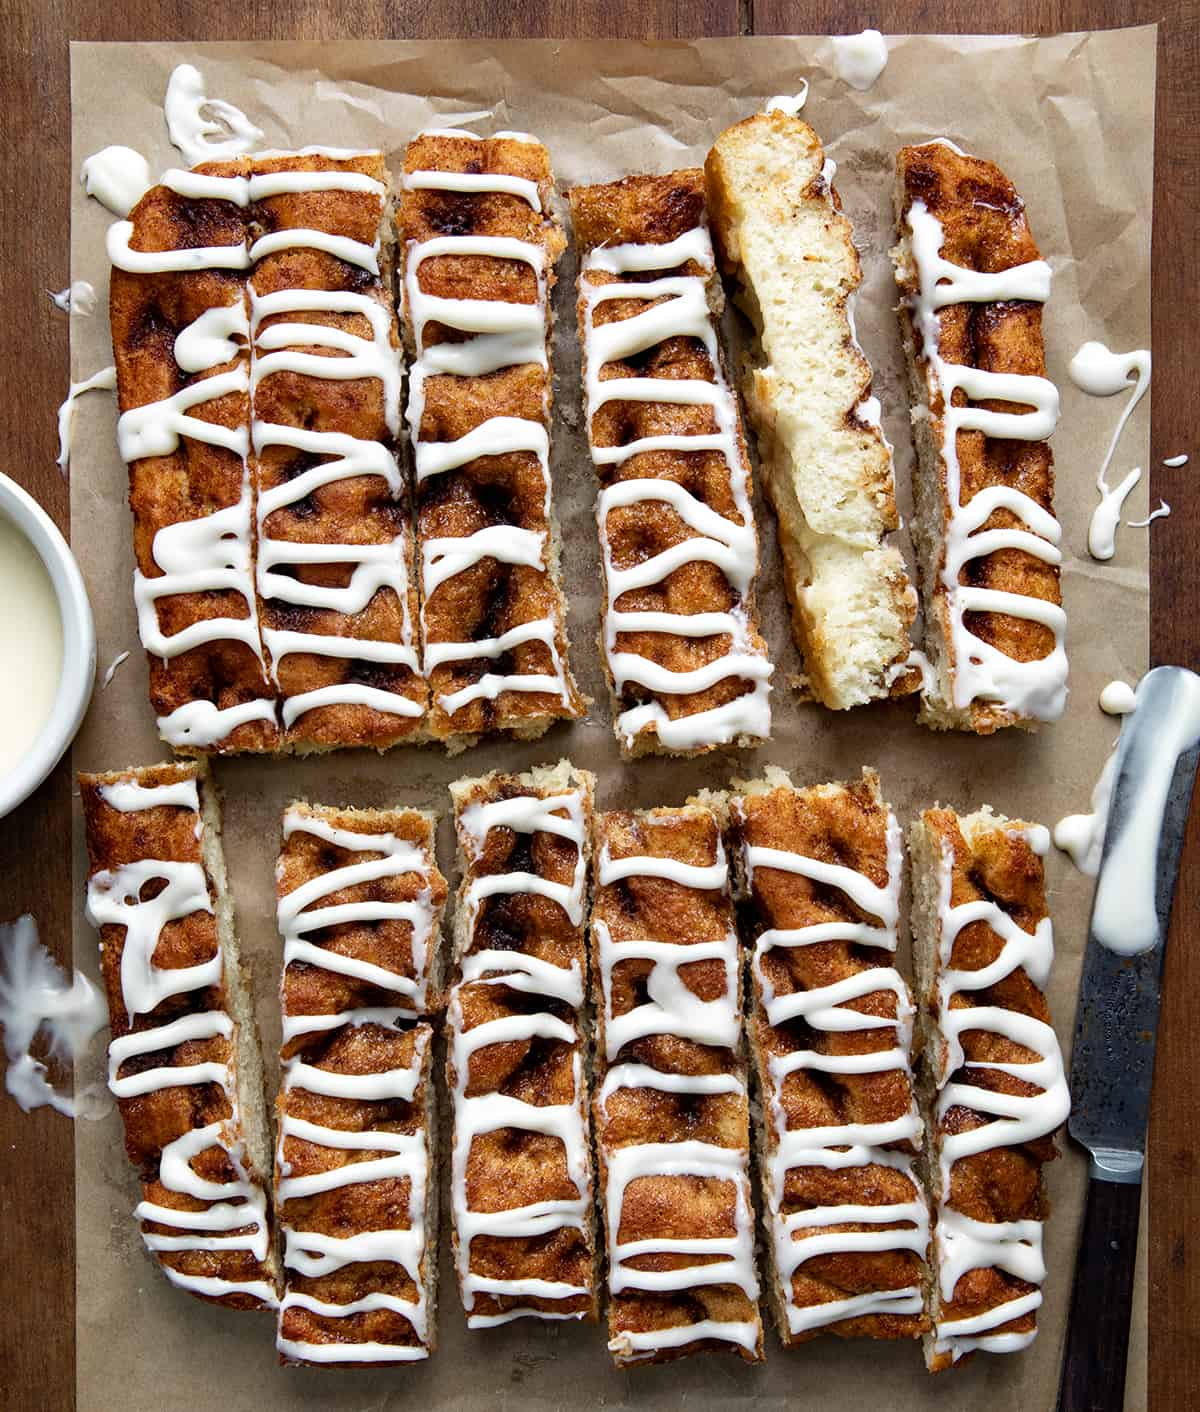 Cinnamon Roll Focaccia sticks on a piece of brown parchment paper from overhead on a wooden table.